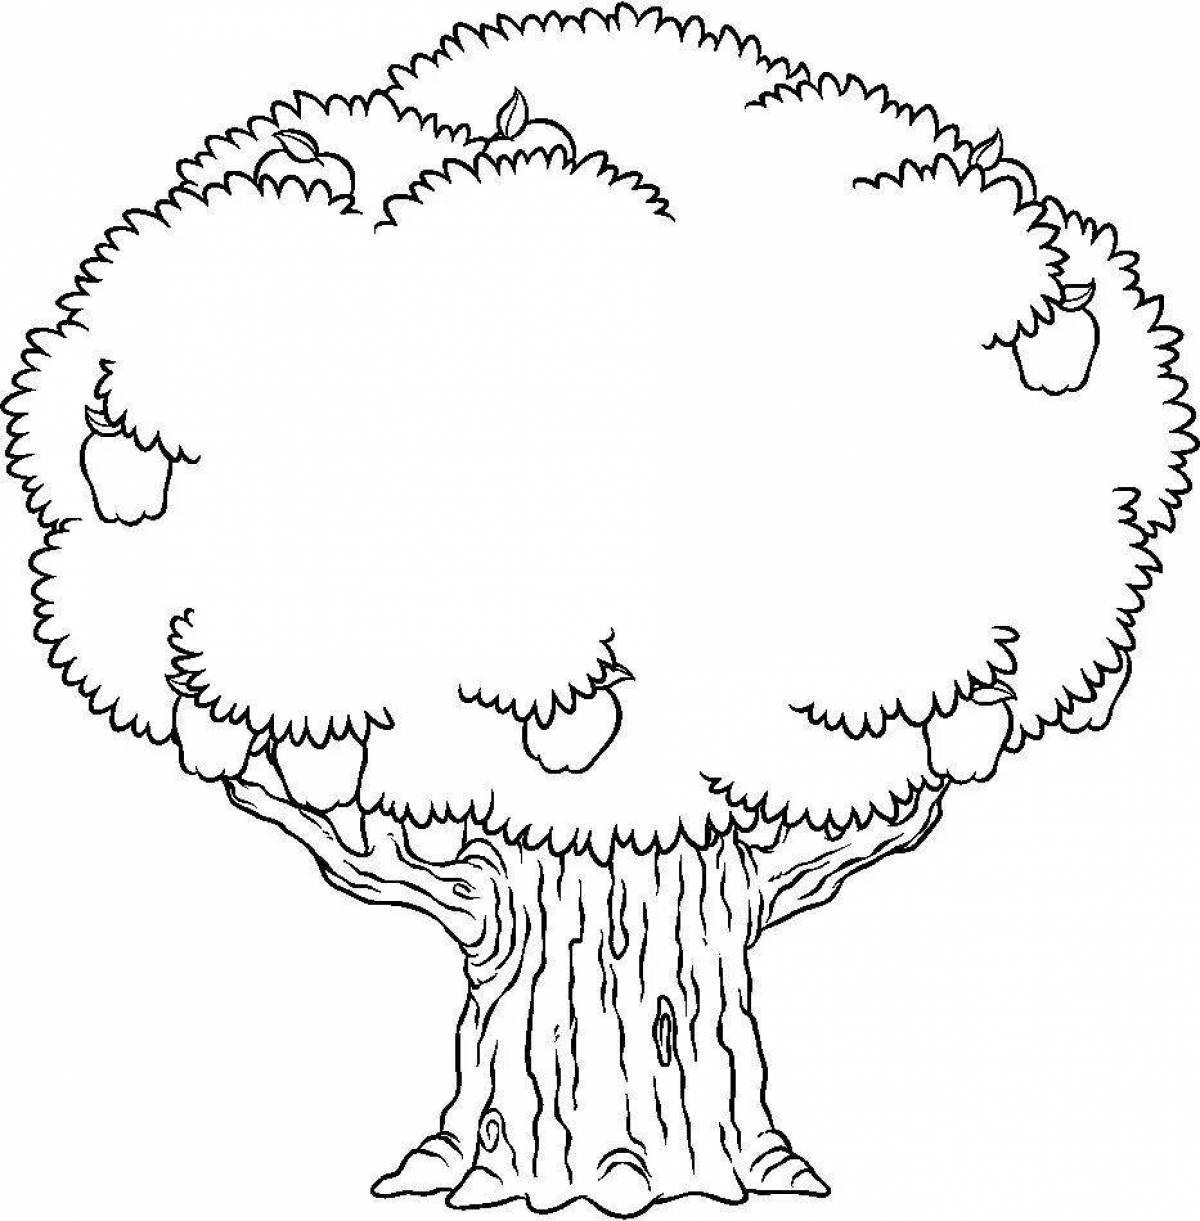 Colorful tree coloring book coloring pages for kids